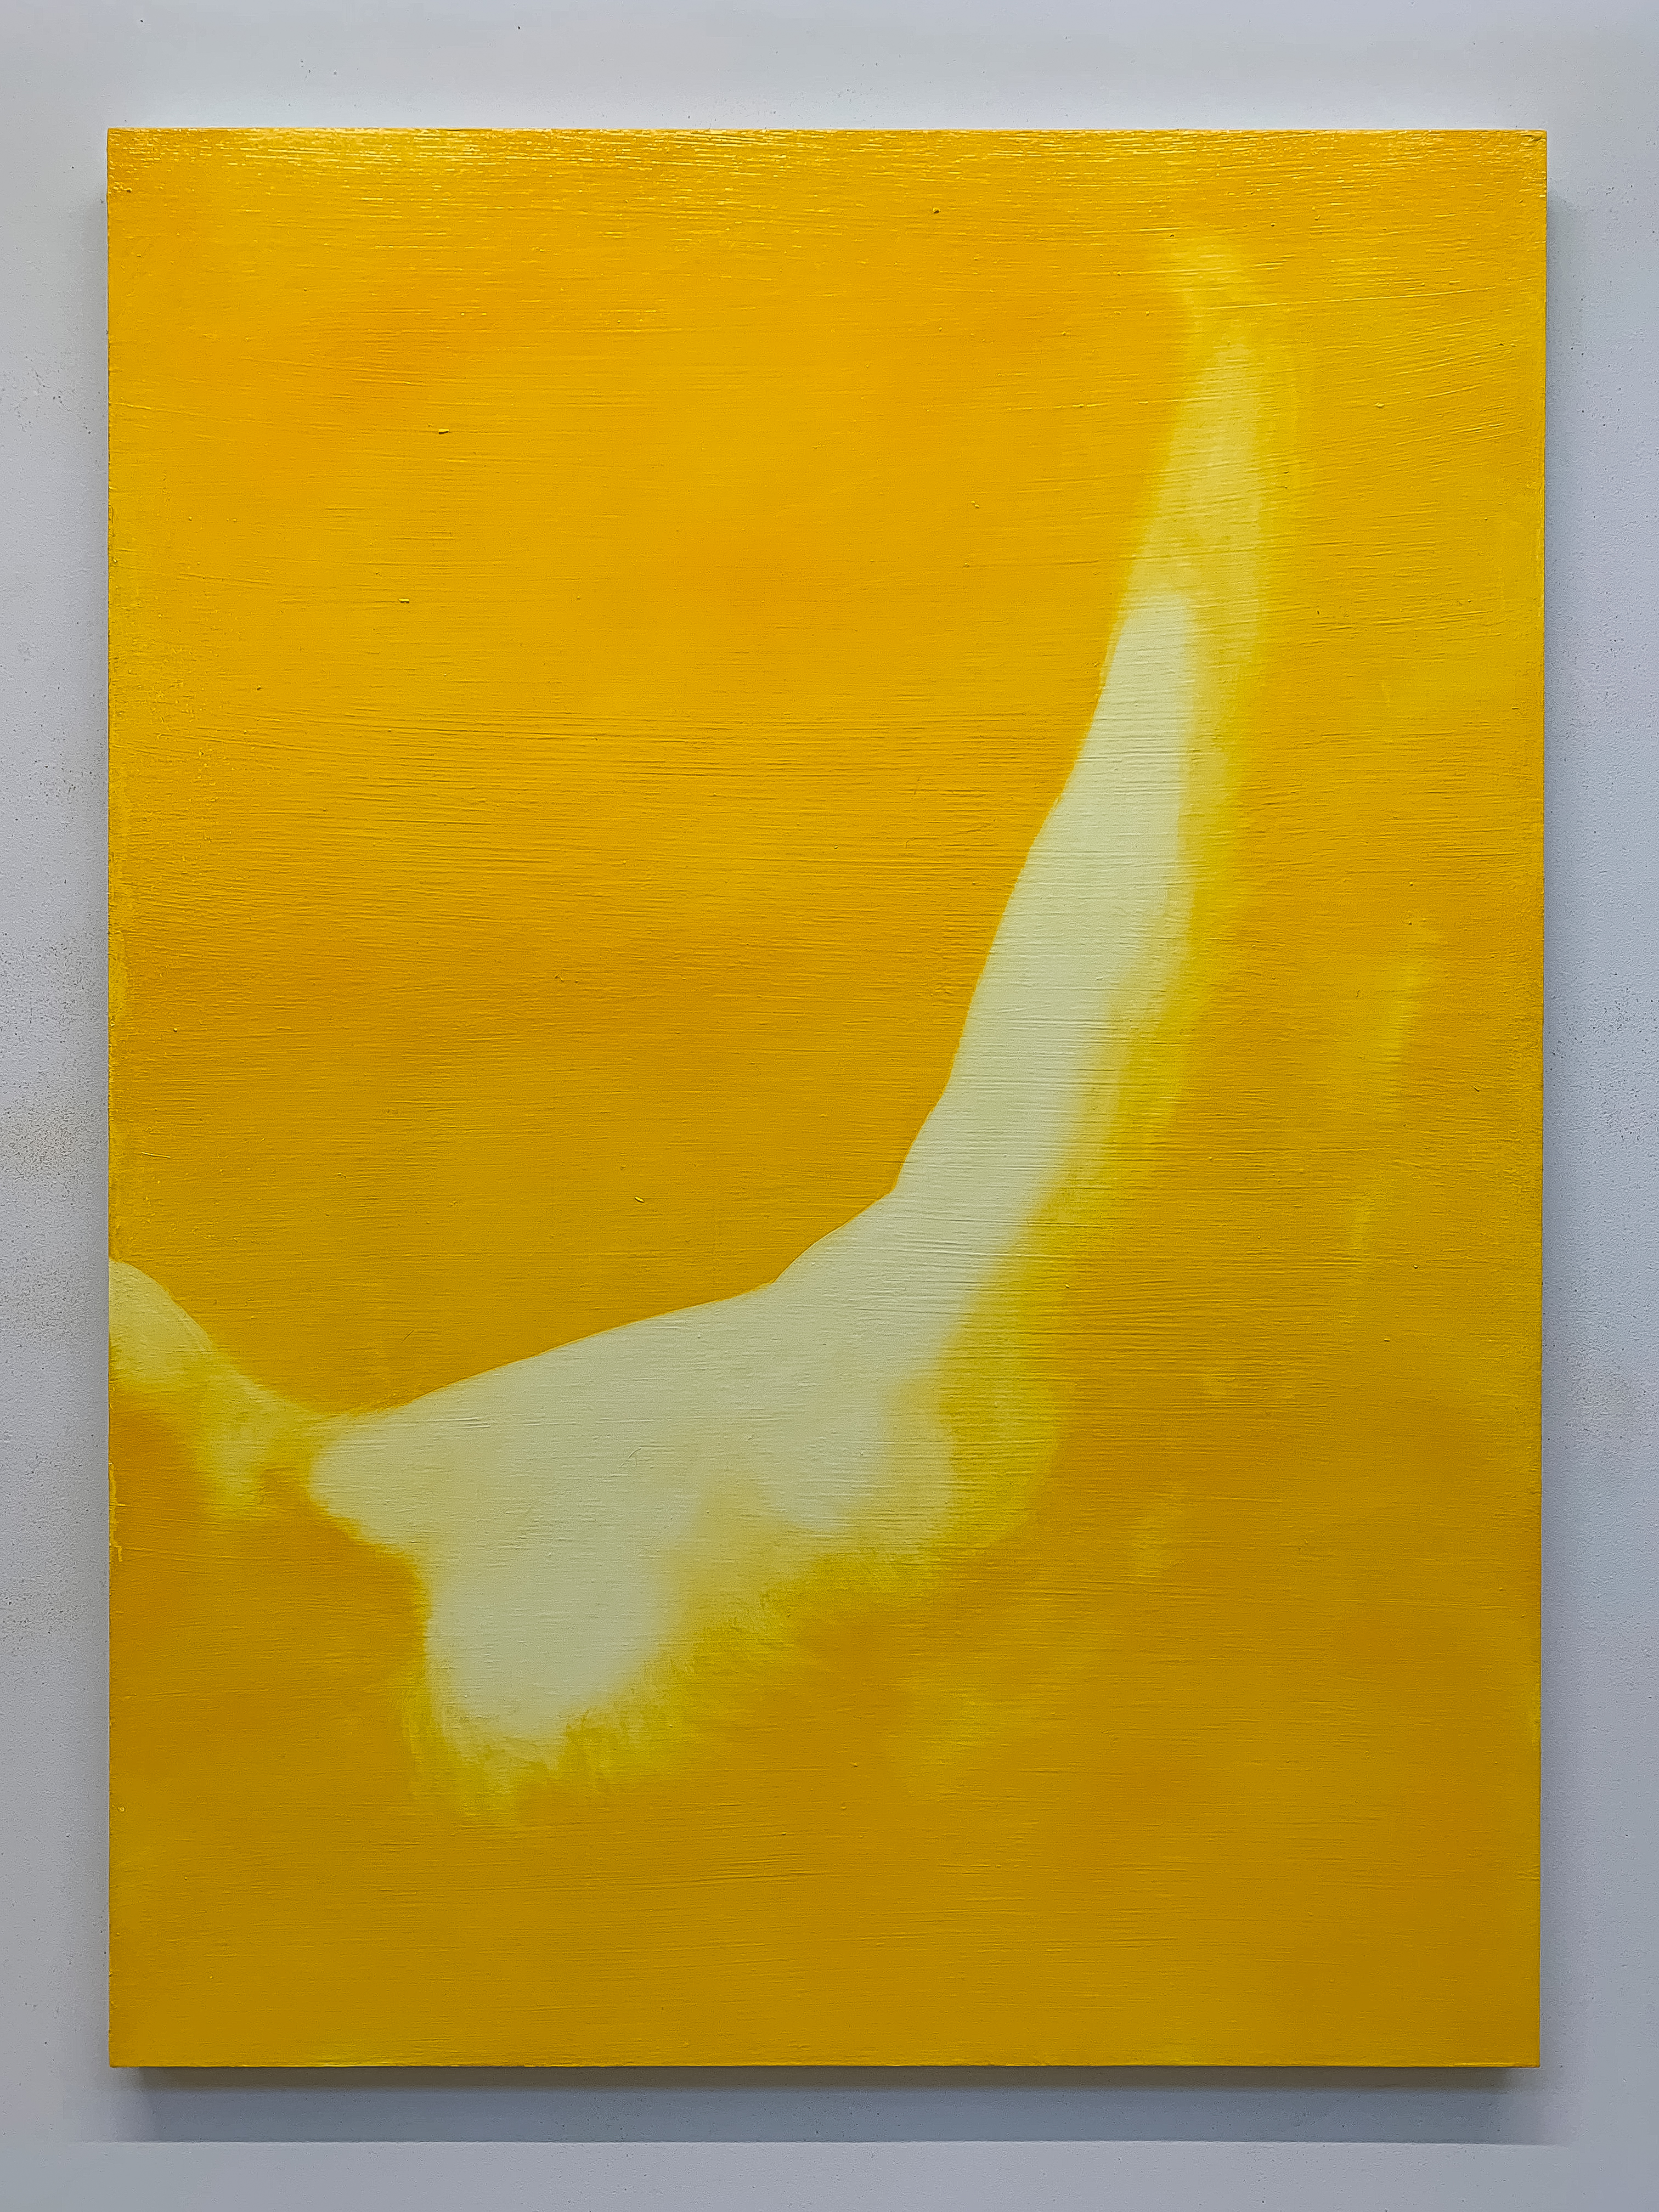 Failed Attempts in the Act of Falling Up No. 3, 2020. Oil on canvas, 48” x 36” by Karl Daum